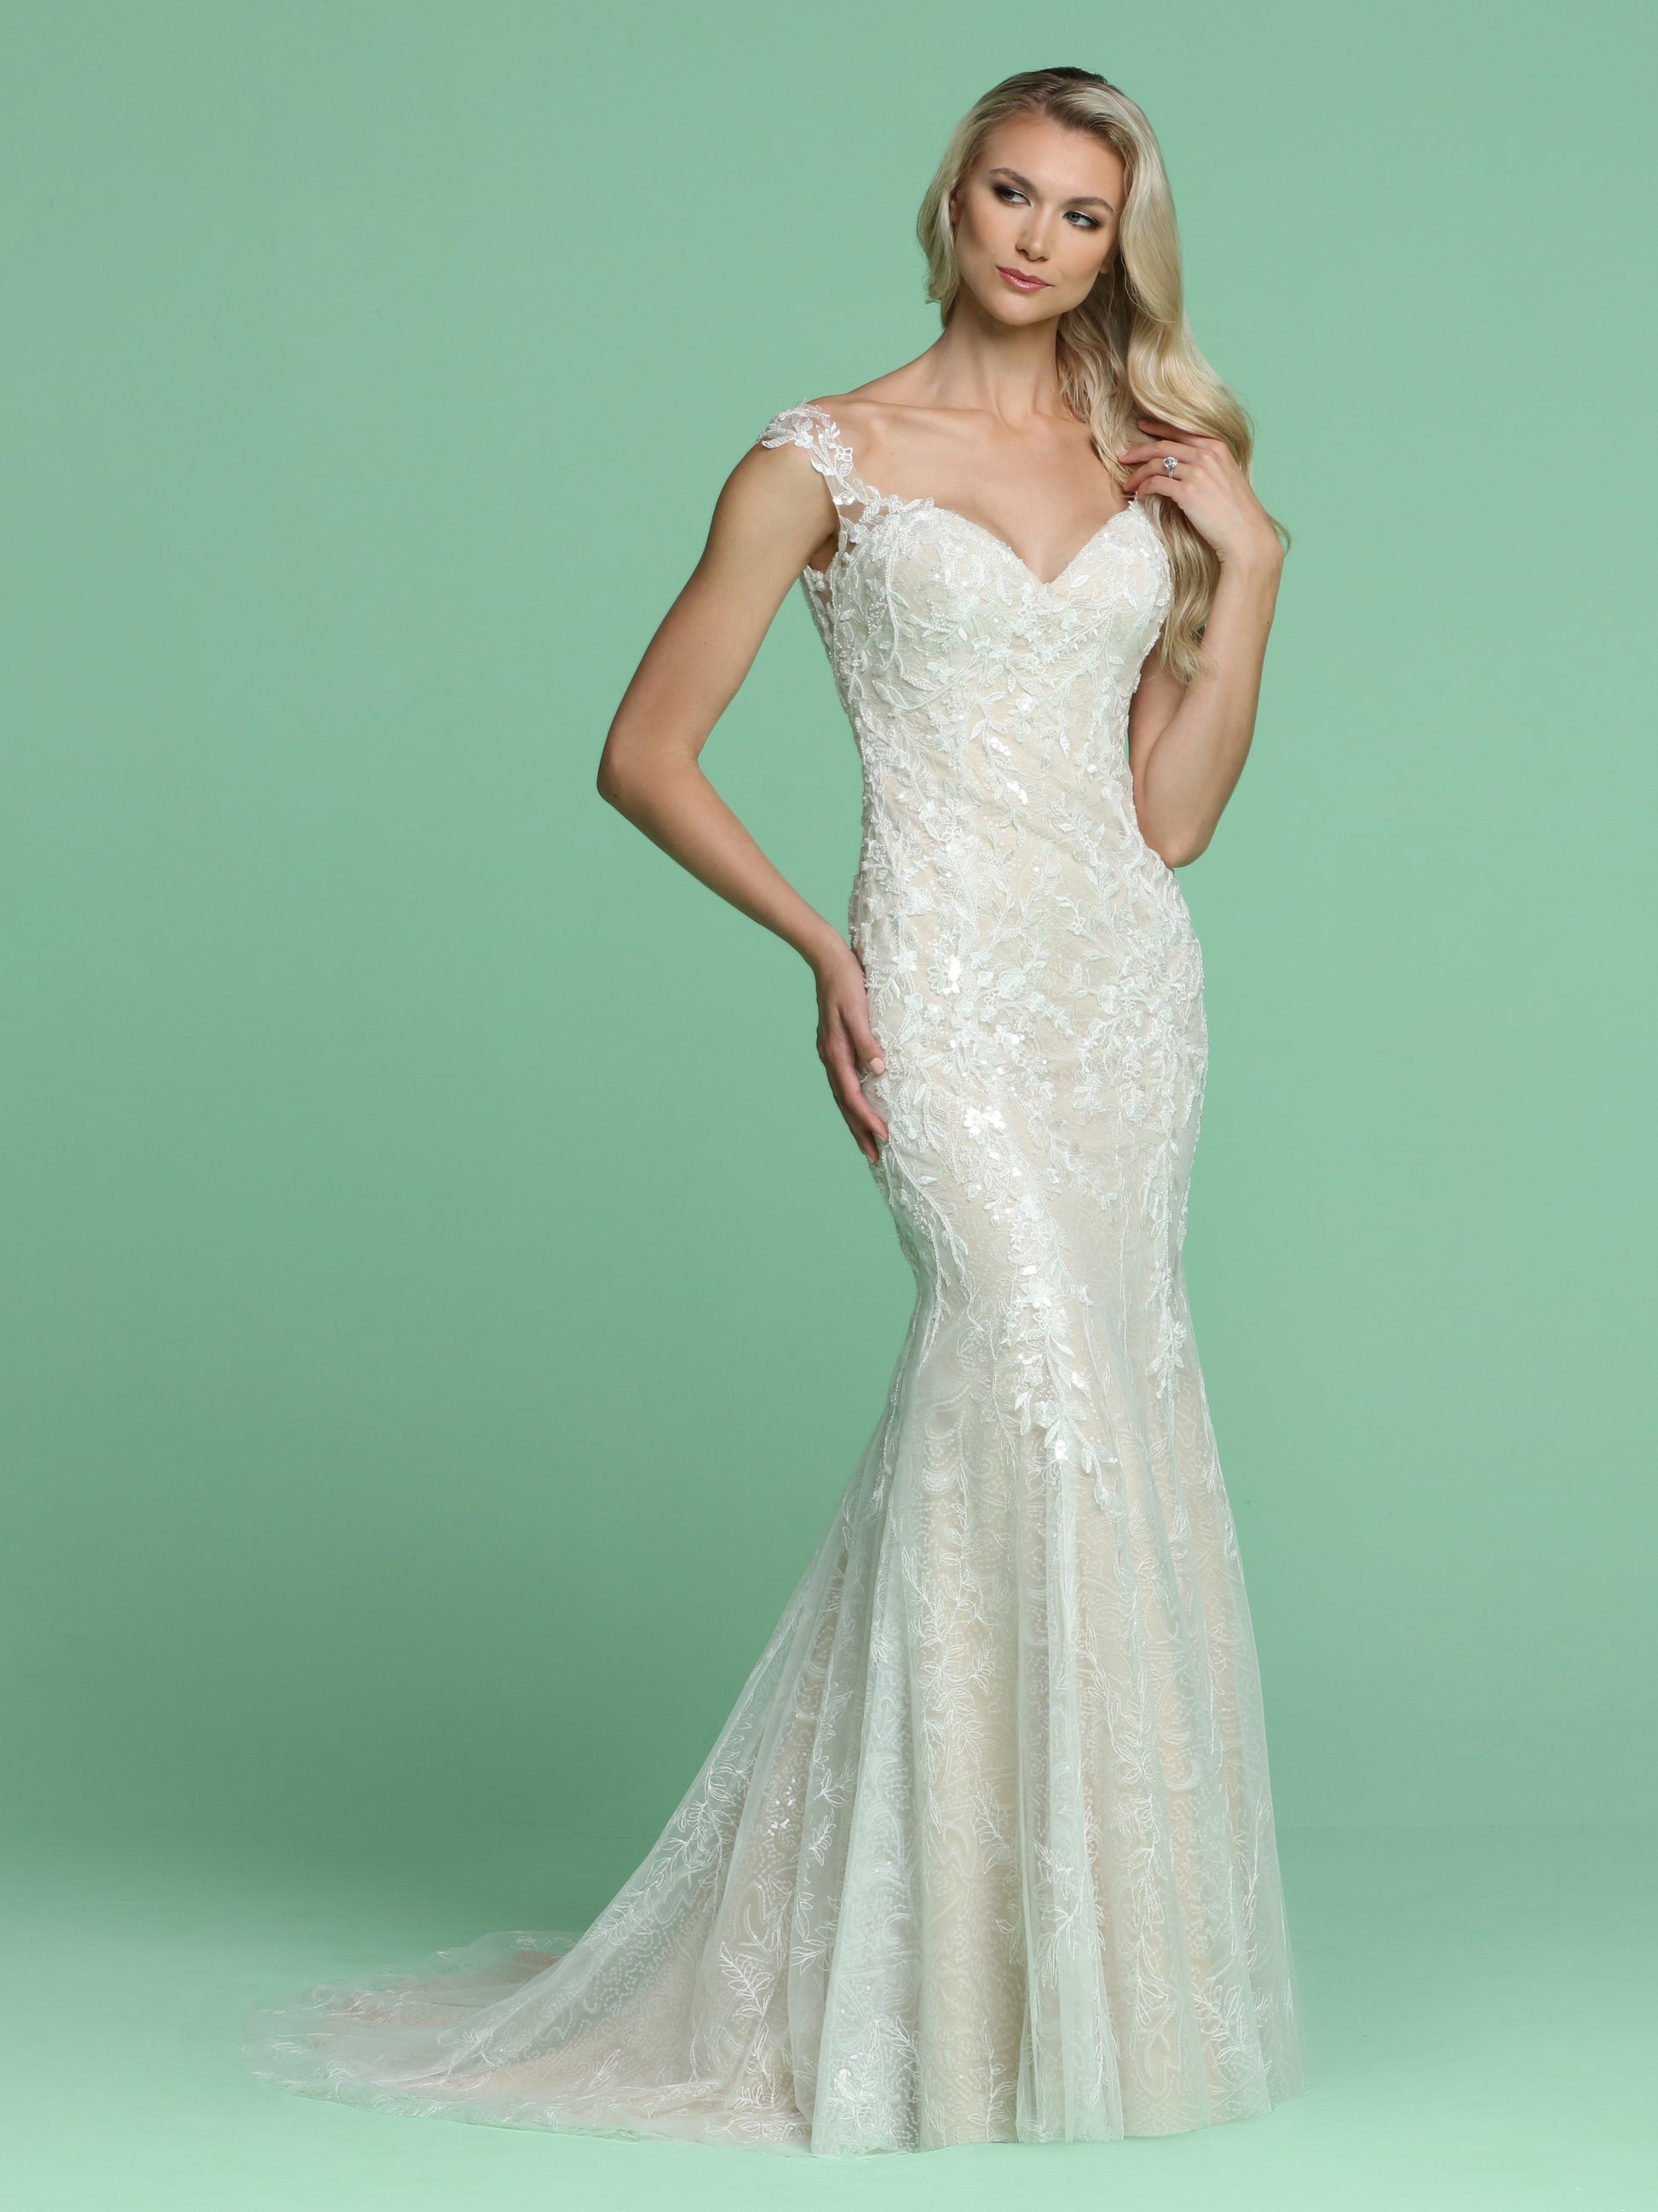 Davinci Bridal 50602 is a long Lace over Lace Floral applique Mermaid silhouette wedding Dress. This Bridal Gown Features a deep sweetheart neckline with off the shoulder sheer lace cap sleeves wrapping around to a sheer lace applique upper V back with buttons. Petite Sequins embellish this detailed lace. Sweeping lace Train!  Available for 1-2 Week Delivery!!!  Available Sizes: 2,4,6,8,10,12,14,16,18,20  Available Colors: Ivory/Ivory, Ivory/Nude